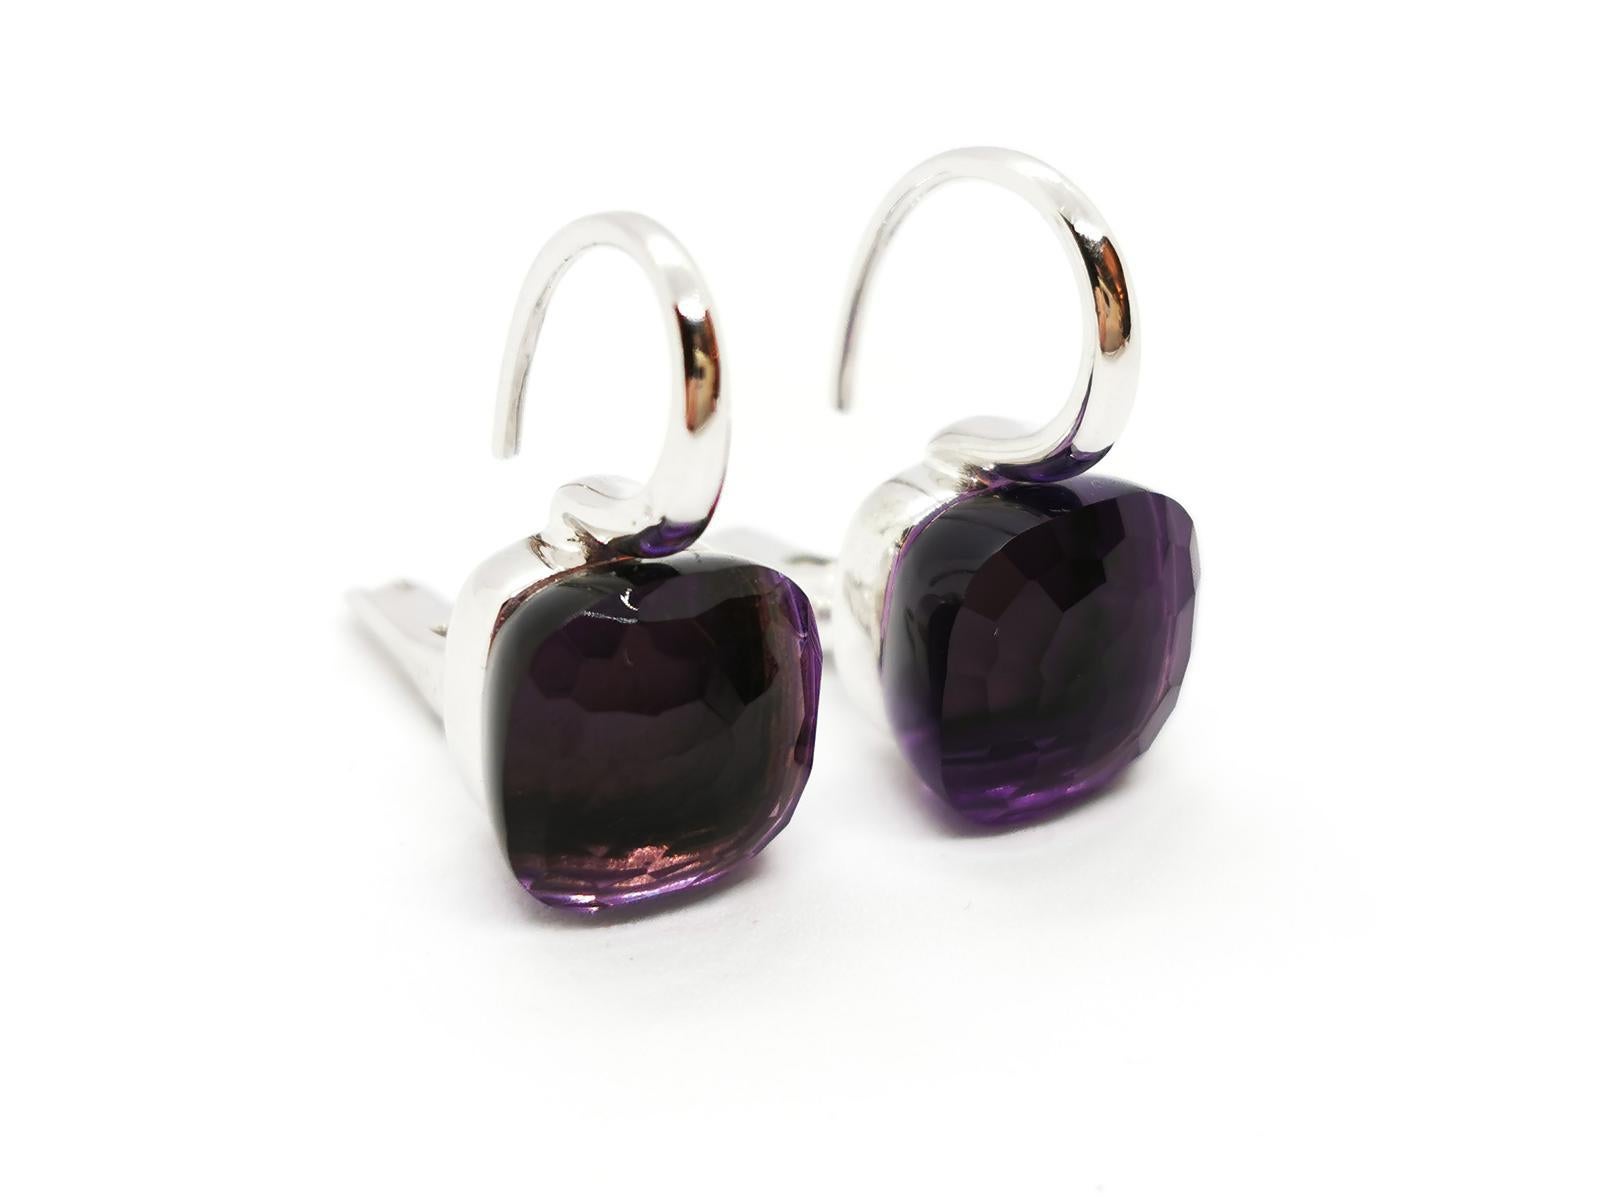 Earrings signed by the house Pomellato. Nudo Classic collection. in white gold 750 thousandths (18 carats). set with two amethysts. dimensions: 2 cm x 1.04 cm. total weight: 9.21 g. eagle head hallmark. new price: 4500€. excellent condition

